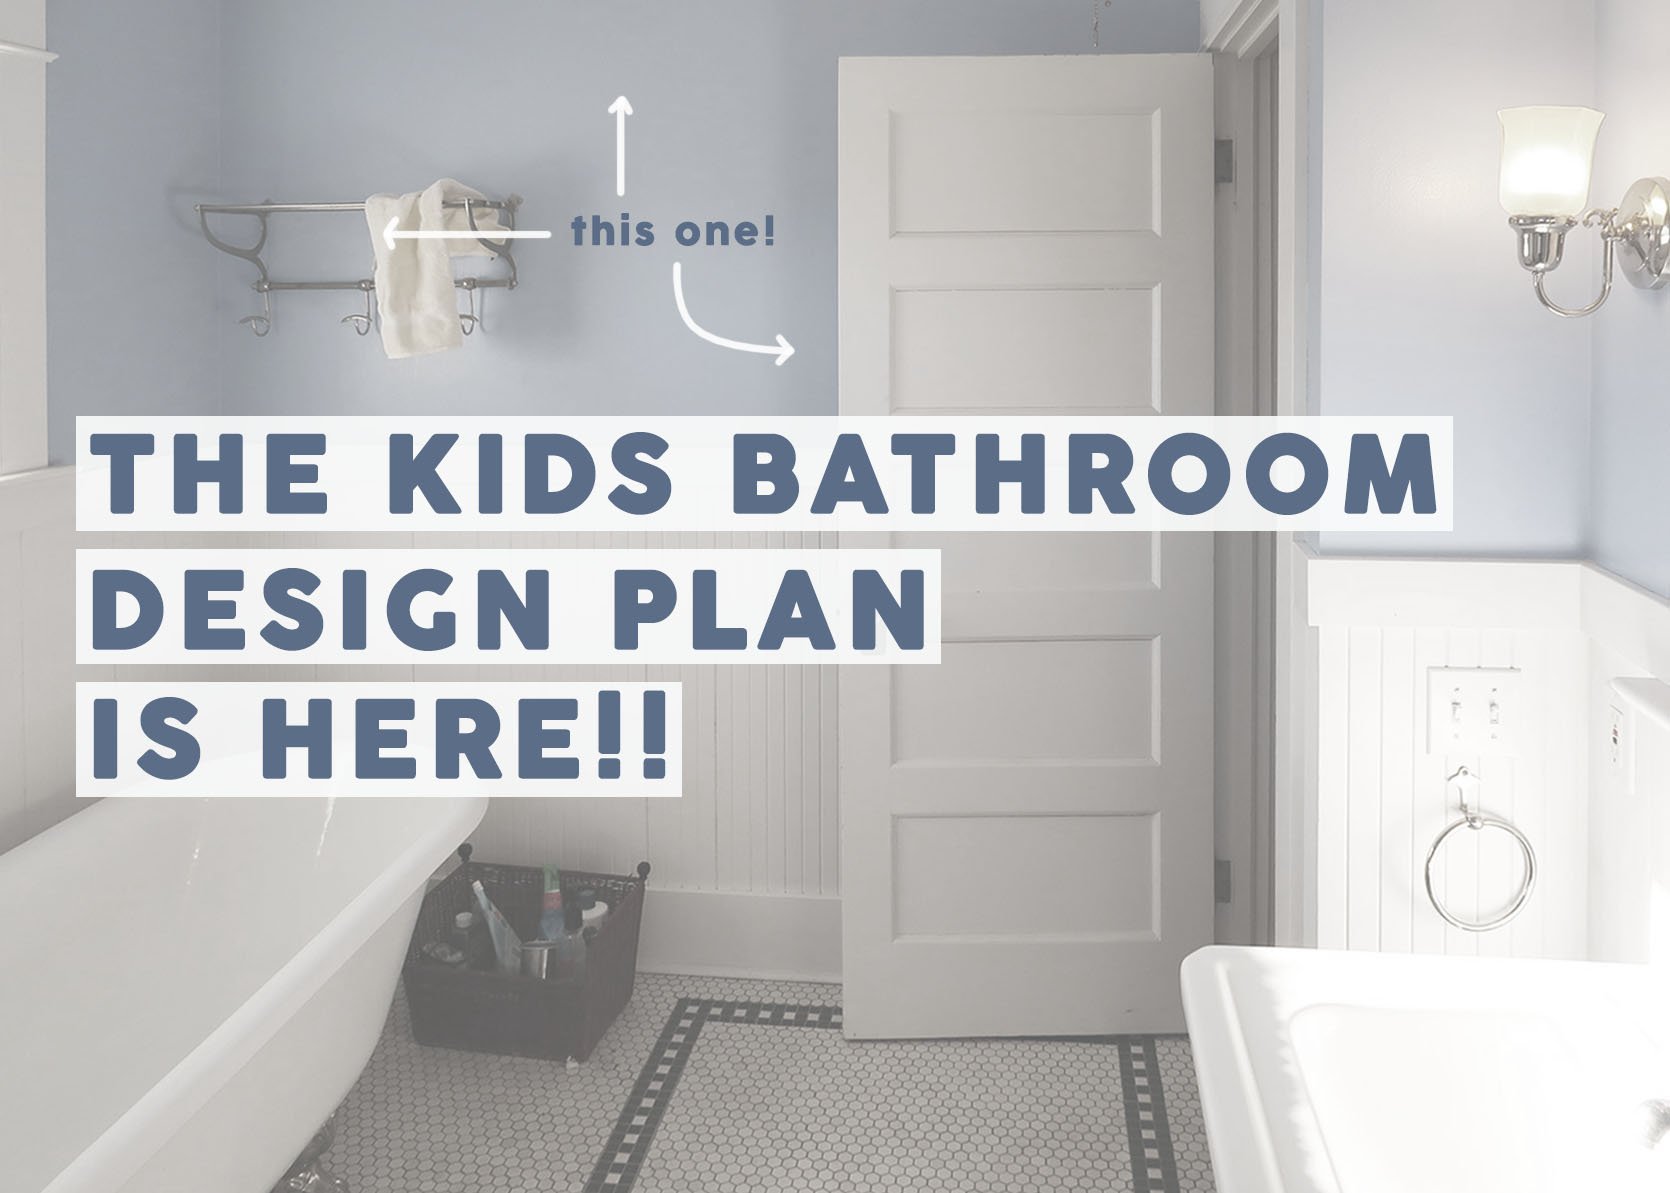 Jack and Jill bathrooms – 10 practical layout ideas for a shared space